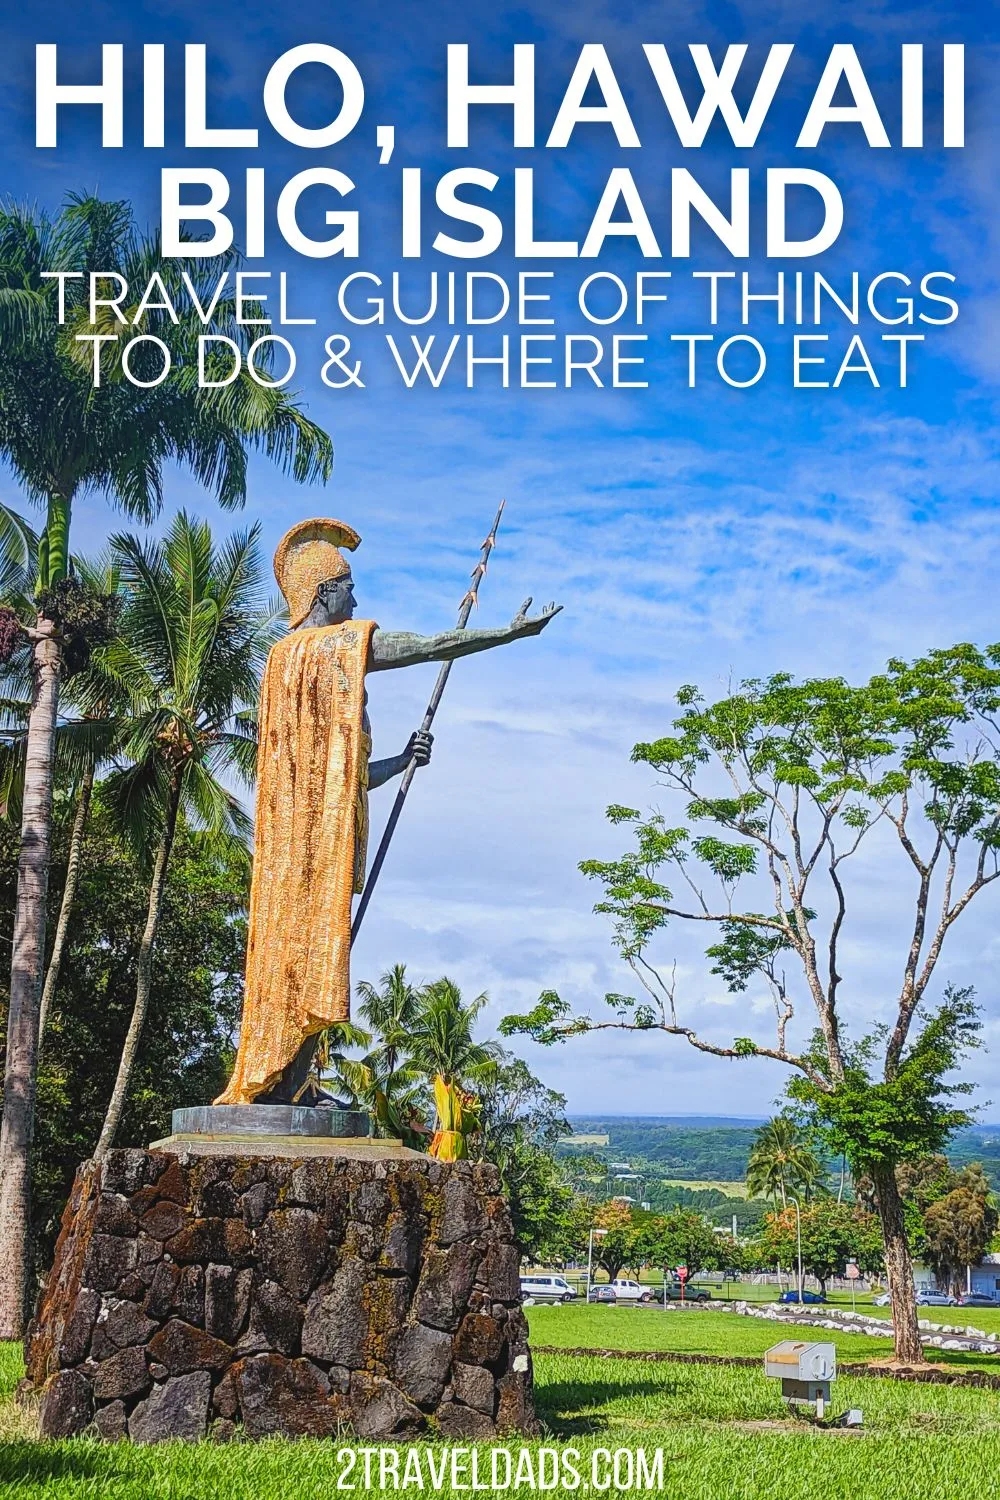 Hilo Travel Guide: Things to Do and Where to Eat on the Big Island